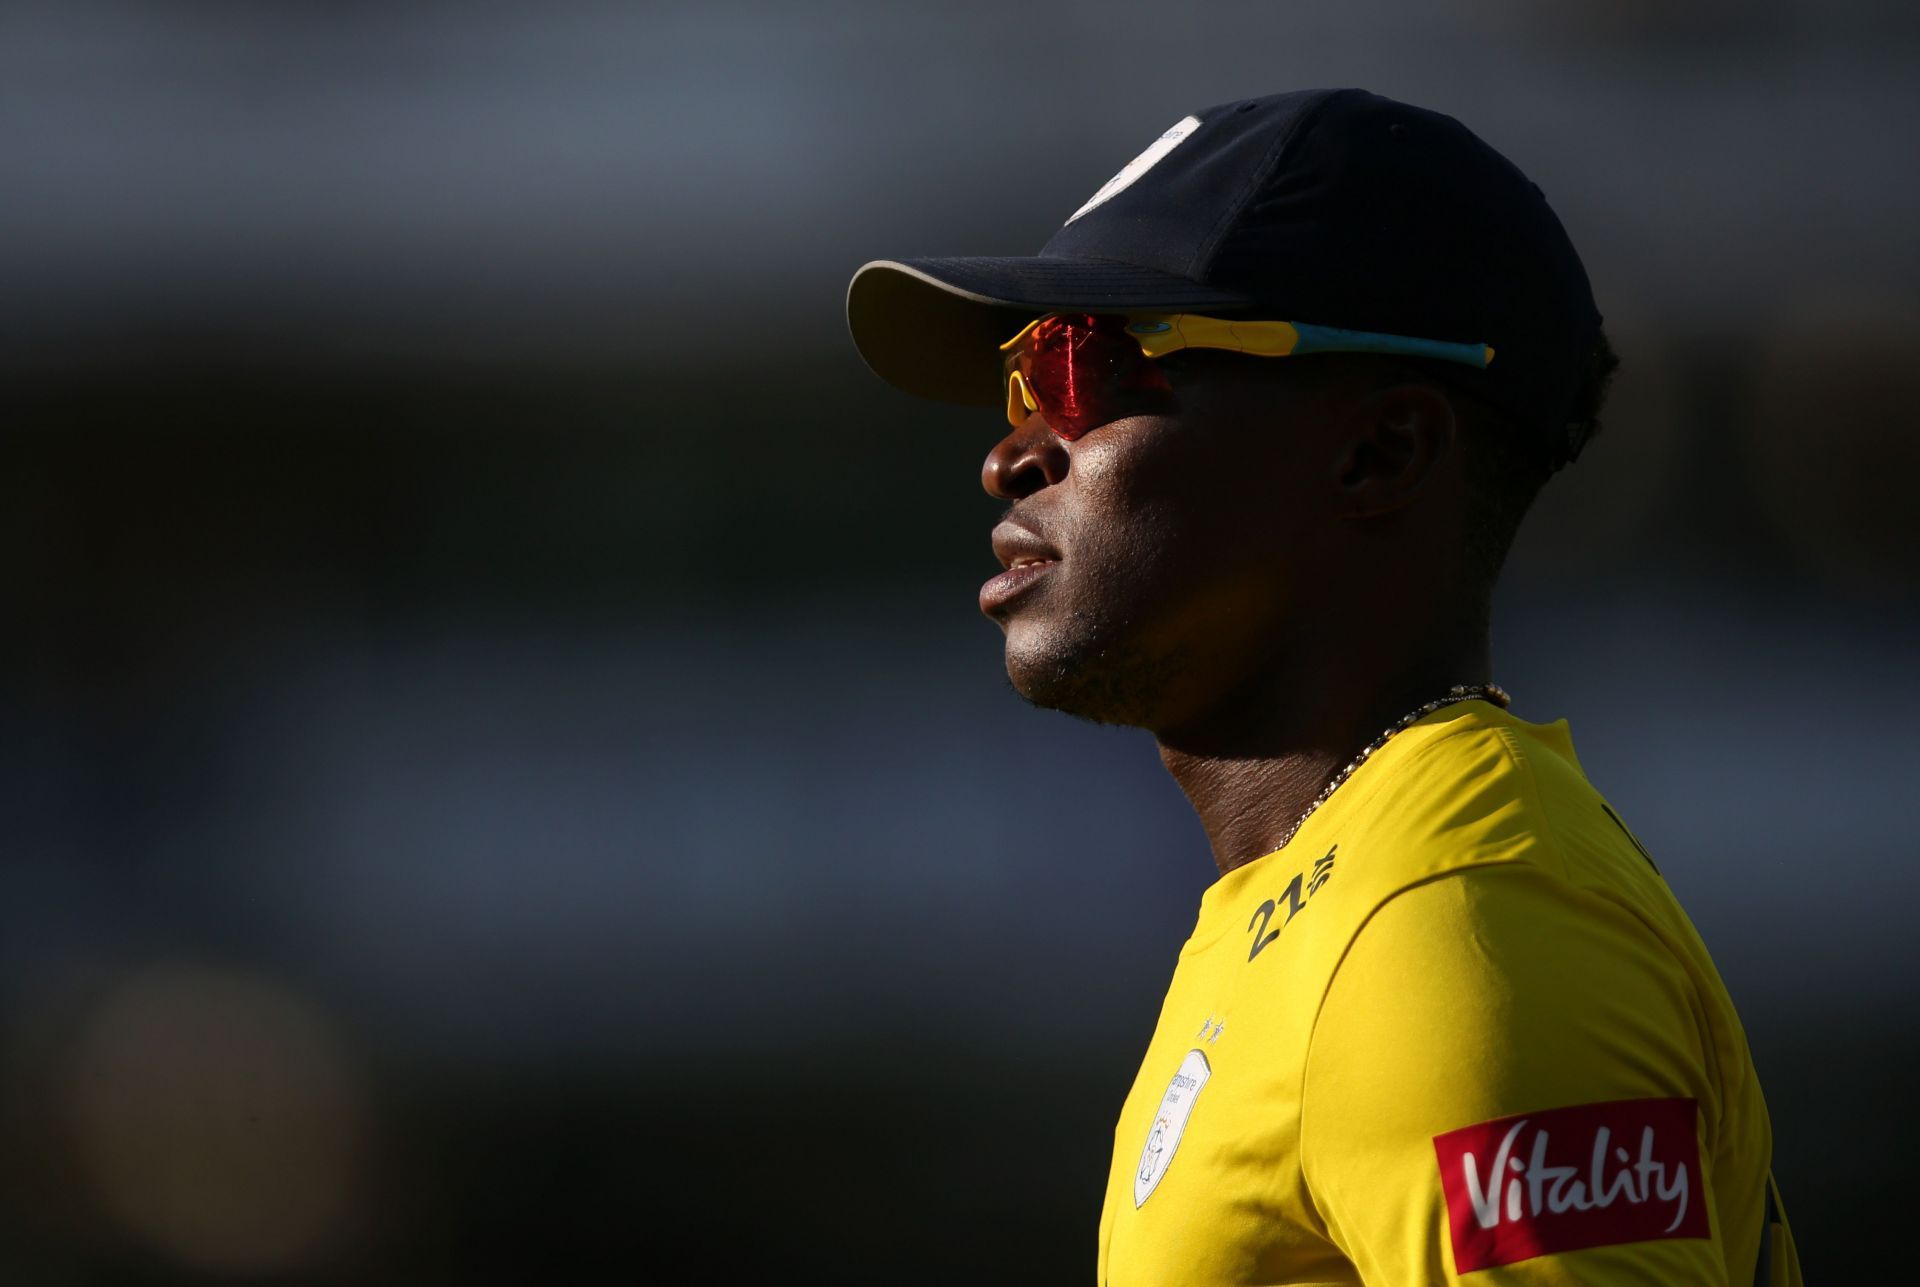 Fidel Edwards has not played an IPL game since 2009 but could earn a deal at IPL Auction 2022